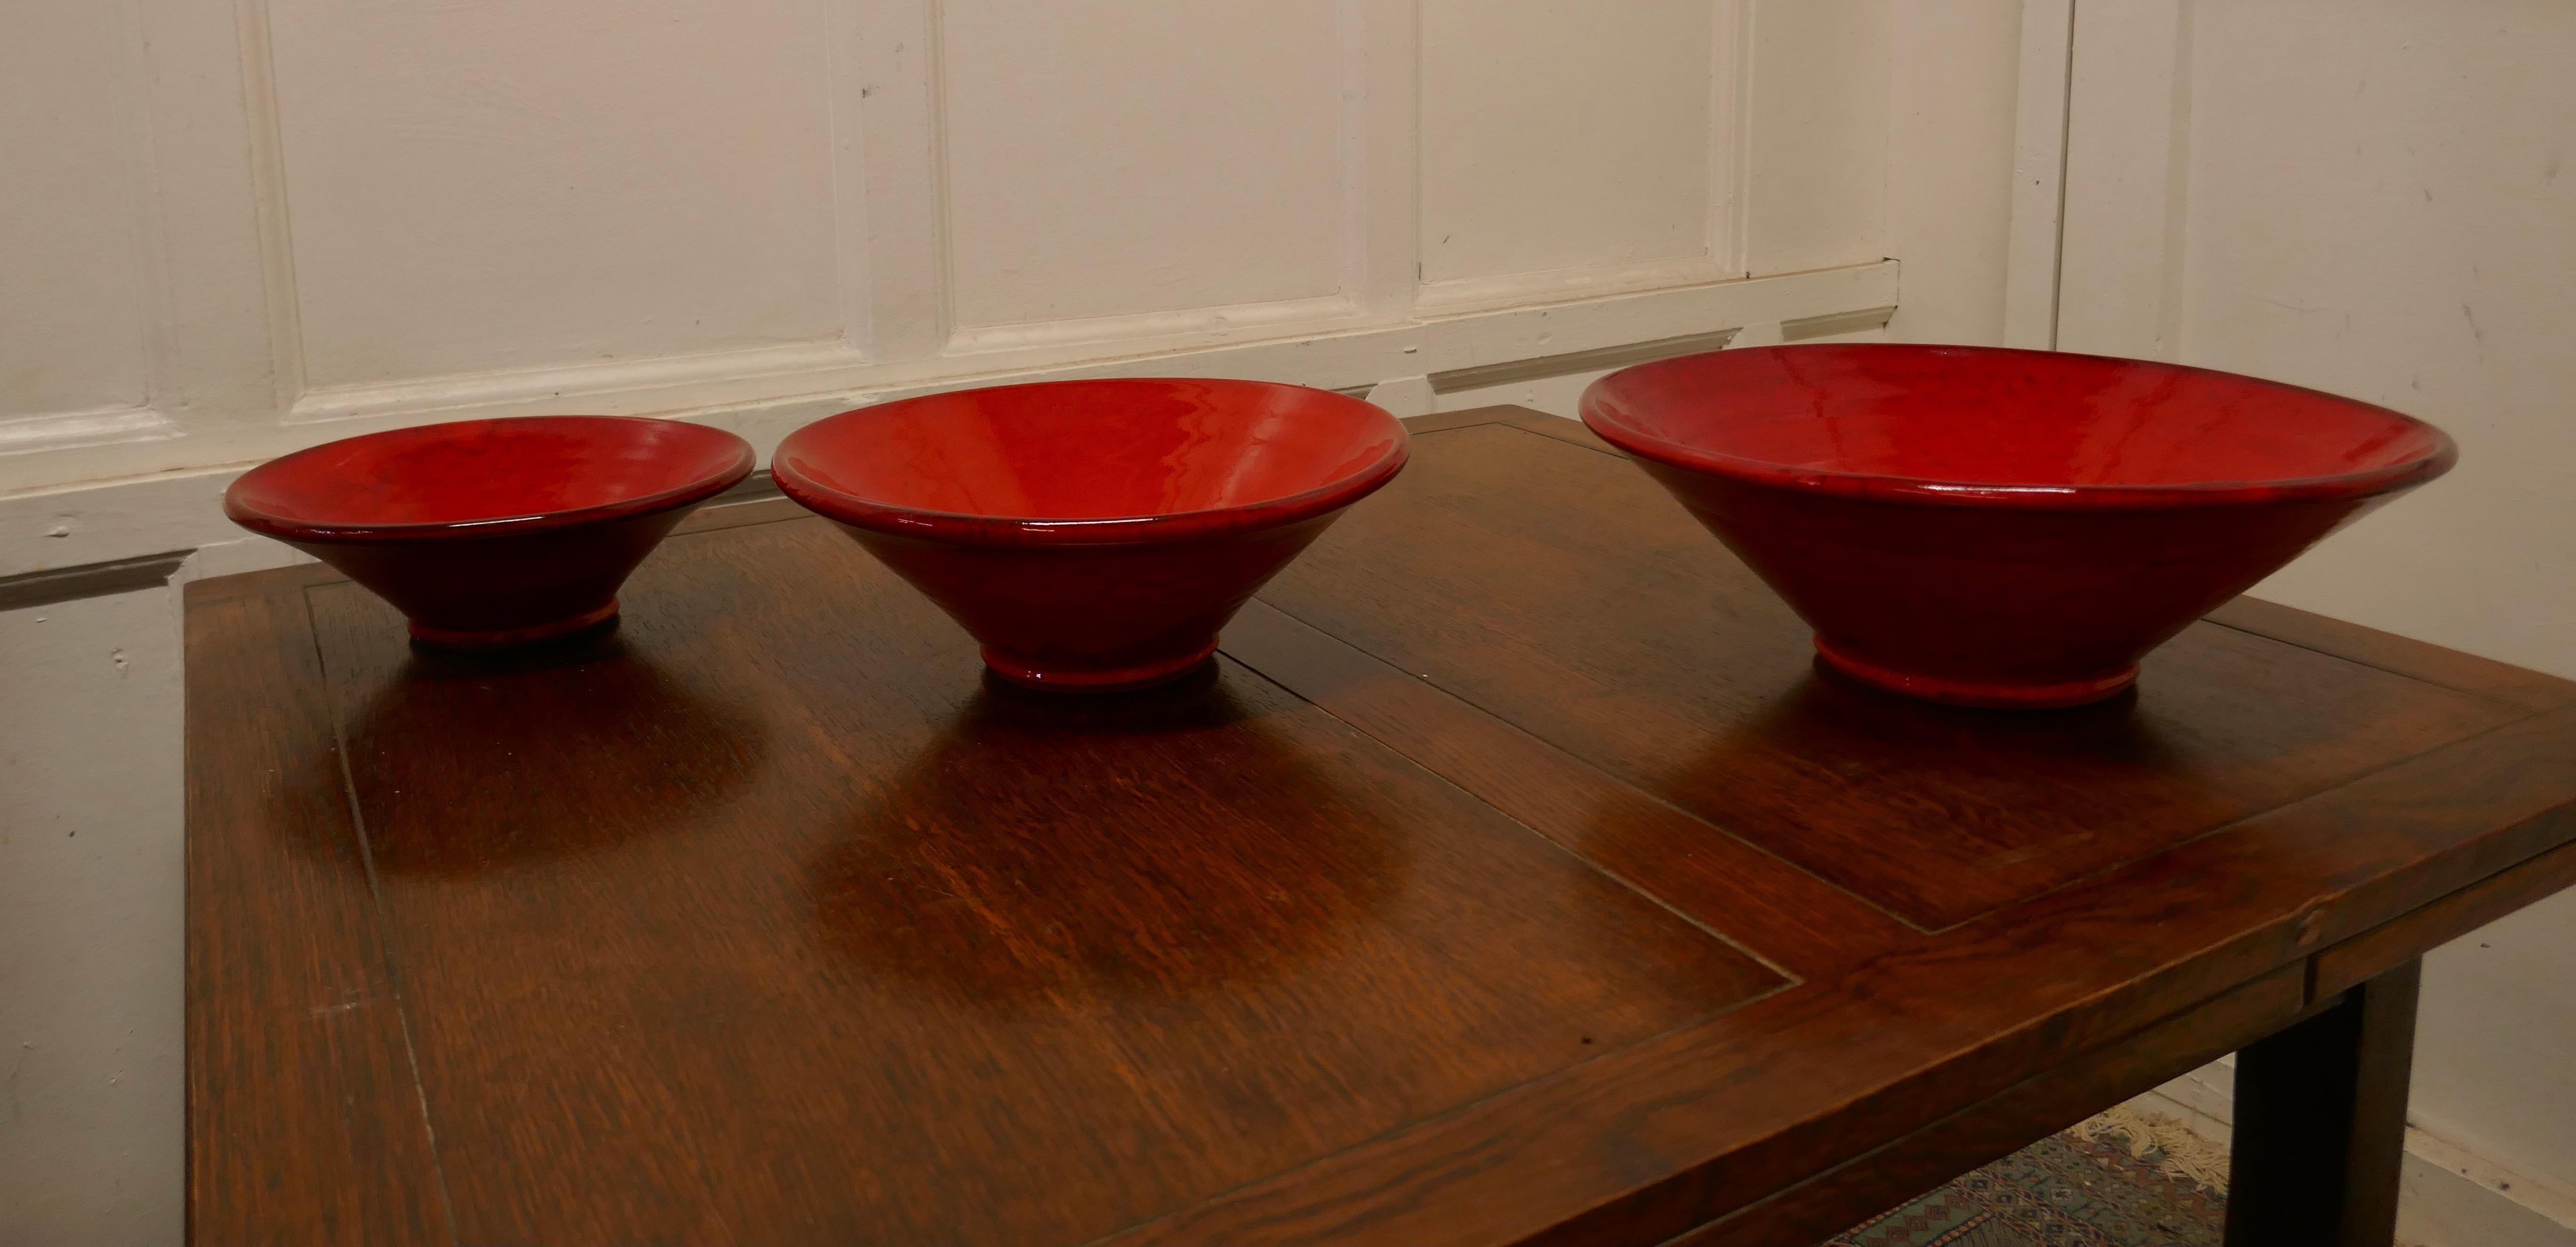 Set of Three Bright Red Terracotta Dutch Bowls For Sale 2